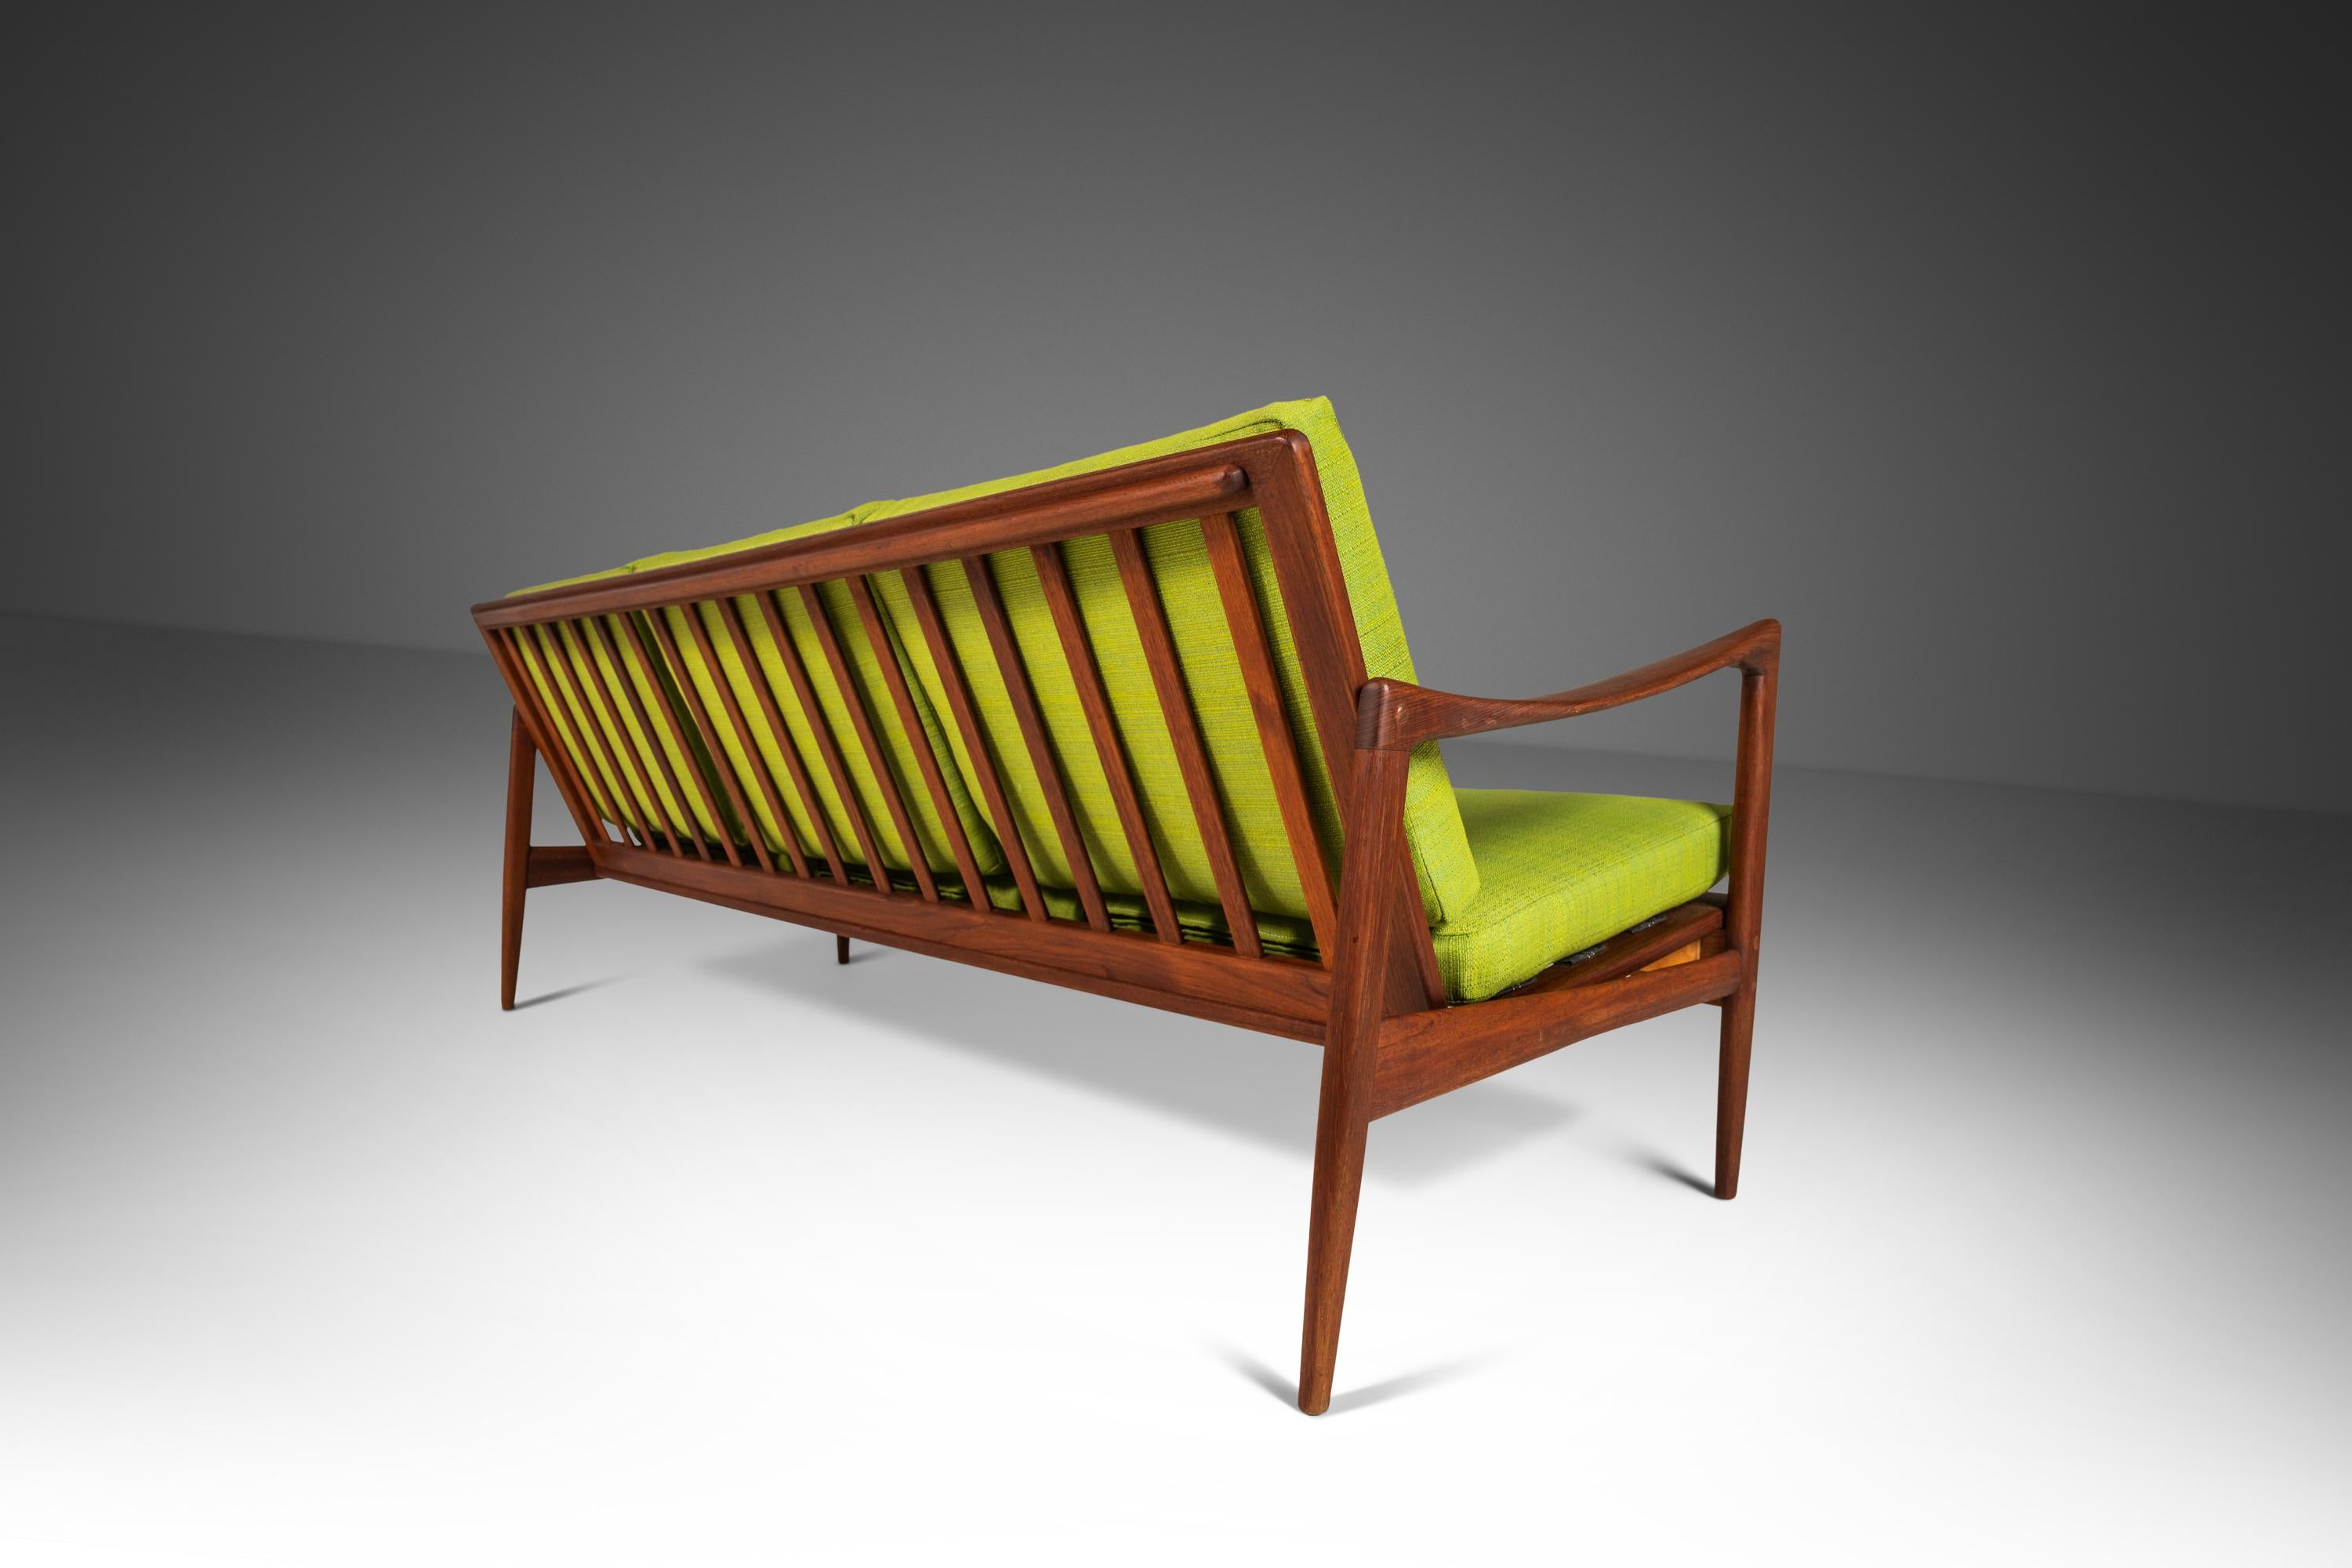 Kandidaten 3 Seat Sofa by Ib Kofod-Larsen for Olof Persons 'OPE', Sweden, 1960s For Sale 3